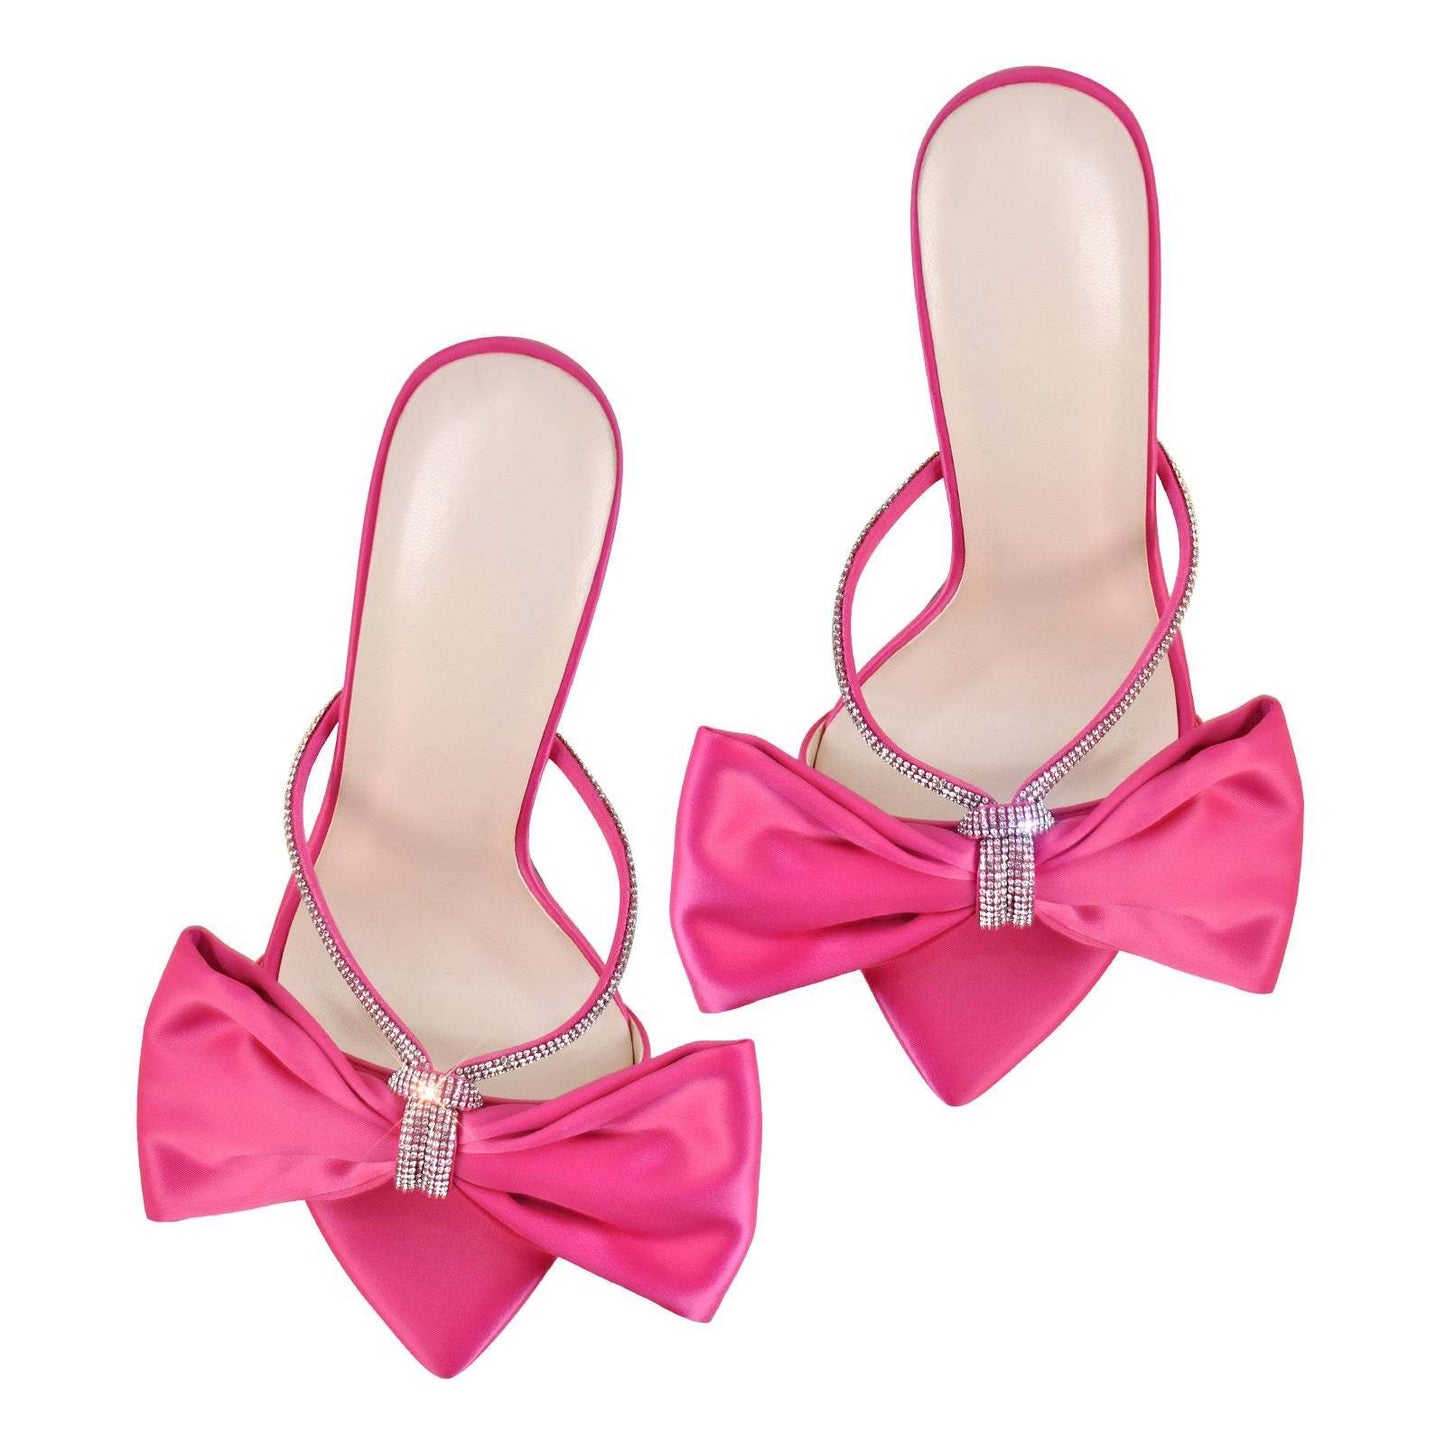 Fashionable High-Heeled Sandals: European and American Style, Large Pointed Bow, Sexy and Trendy